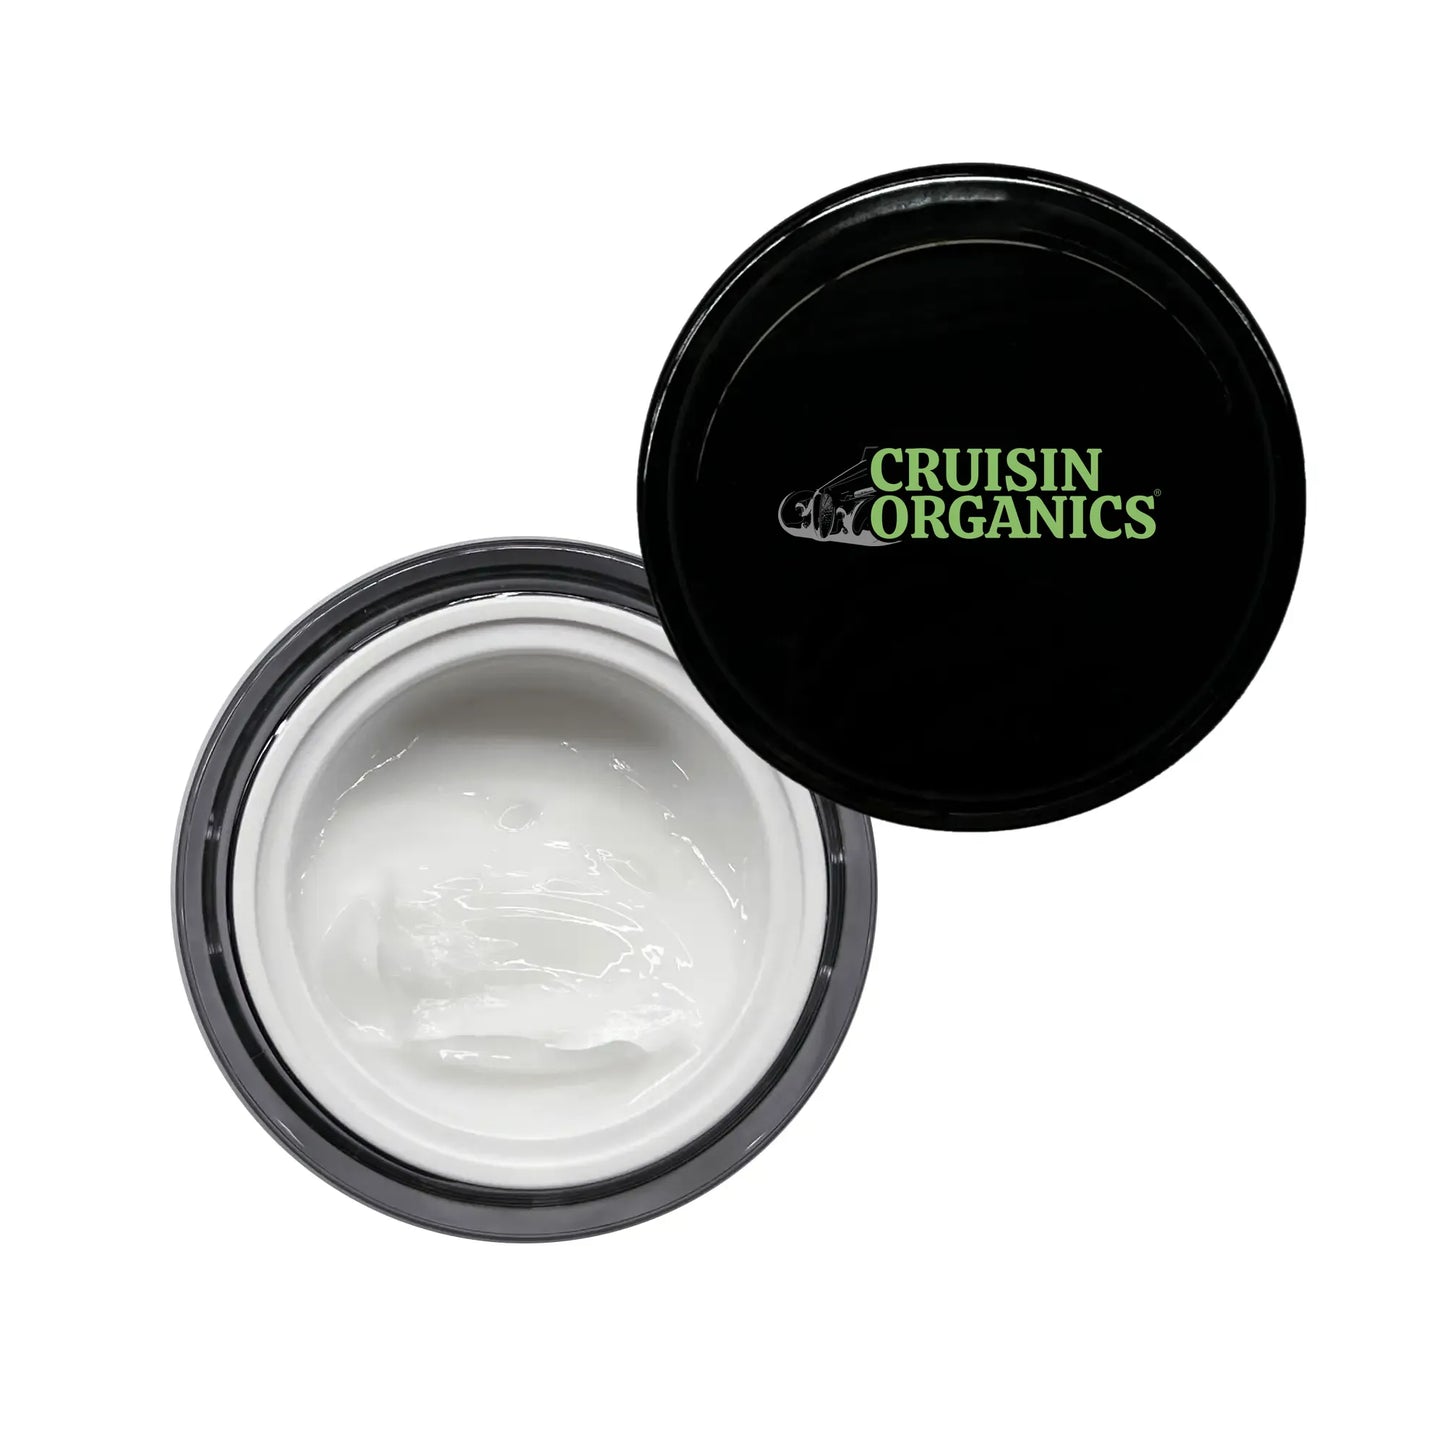 Cruisin Organics eye cream tightens those fine, sensitive lines around your eyes. Our formula is enriched with Persian silk tree bark extract, which revitalizes cell energy and tired skin. Spilanthes acmella flower extract is another natural ingredient that’s found in our active eye cream that firms the skin and reduces wrinkling. Our active eye cream applies like silk and absorbs into the skin, quickly smoothing out the skin around your eyes. What better way to end the night and wake up refreshed?